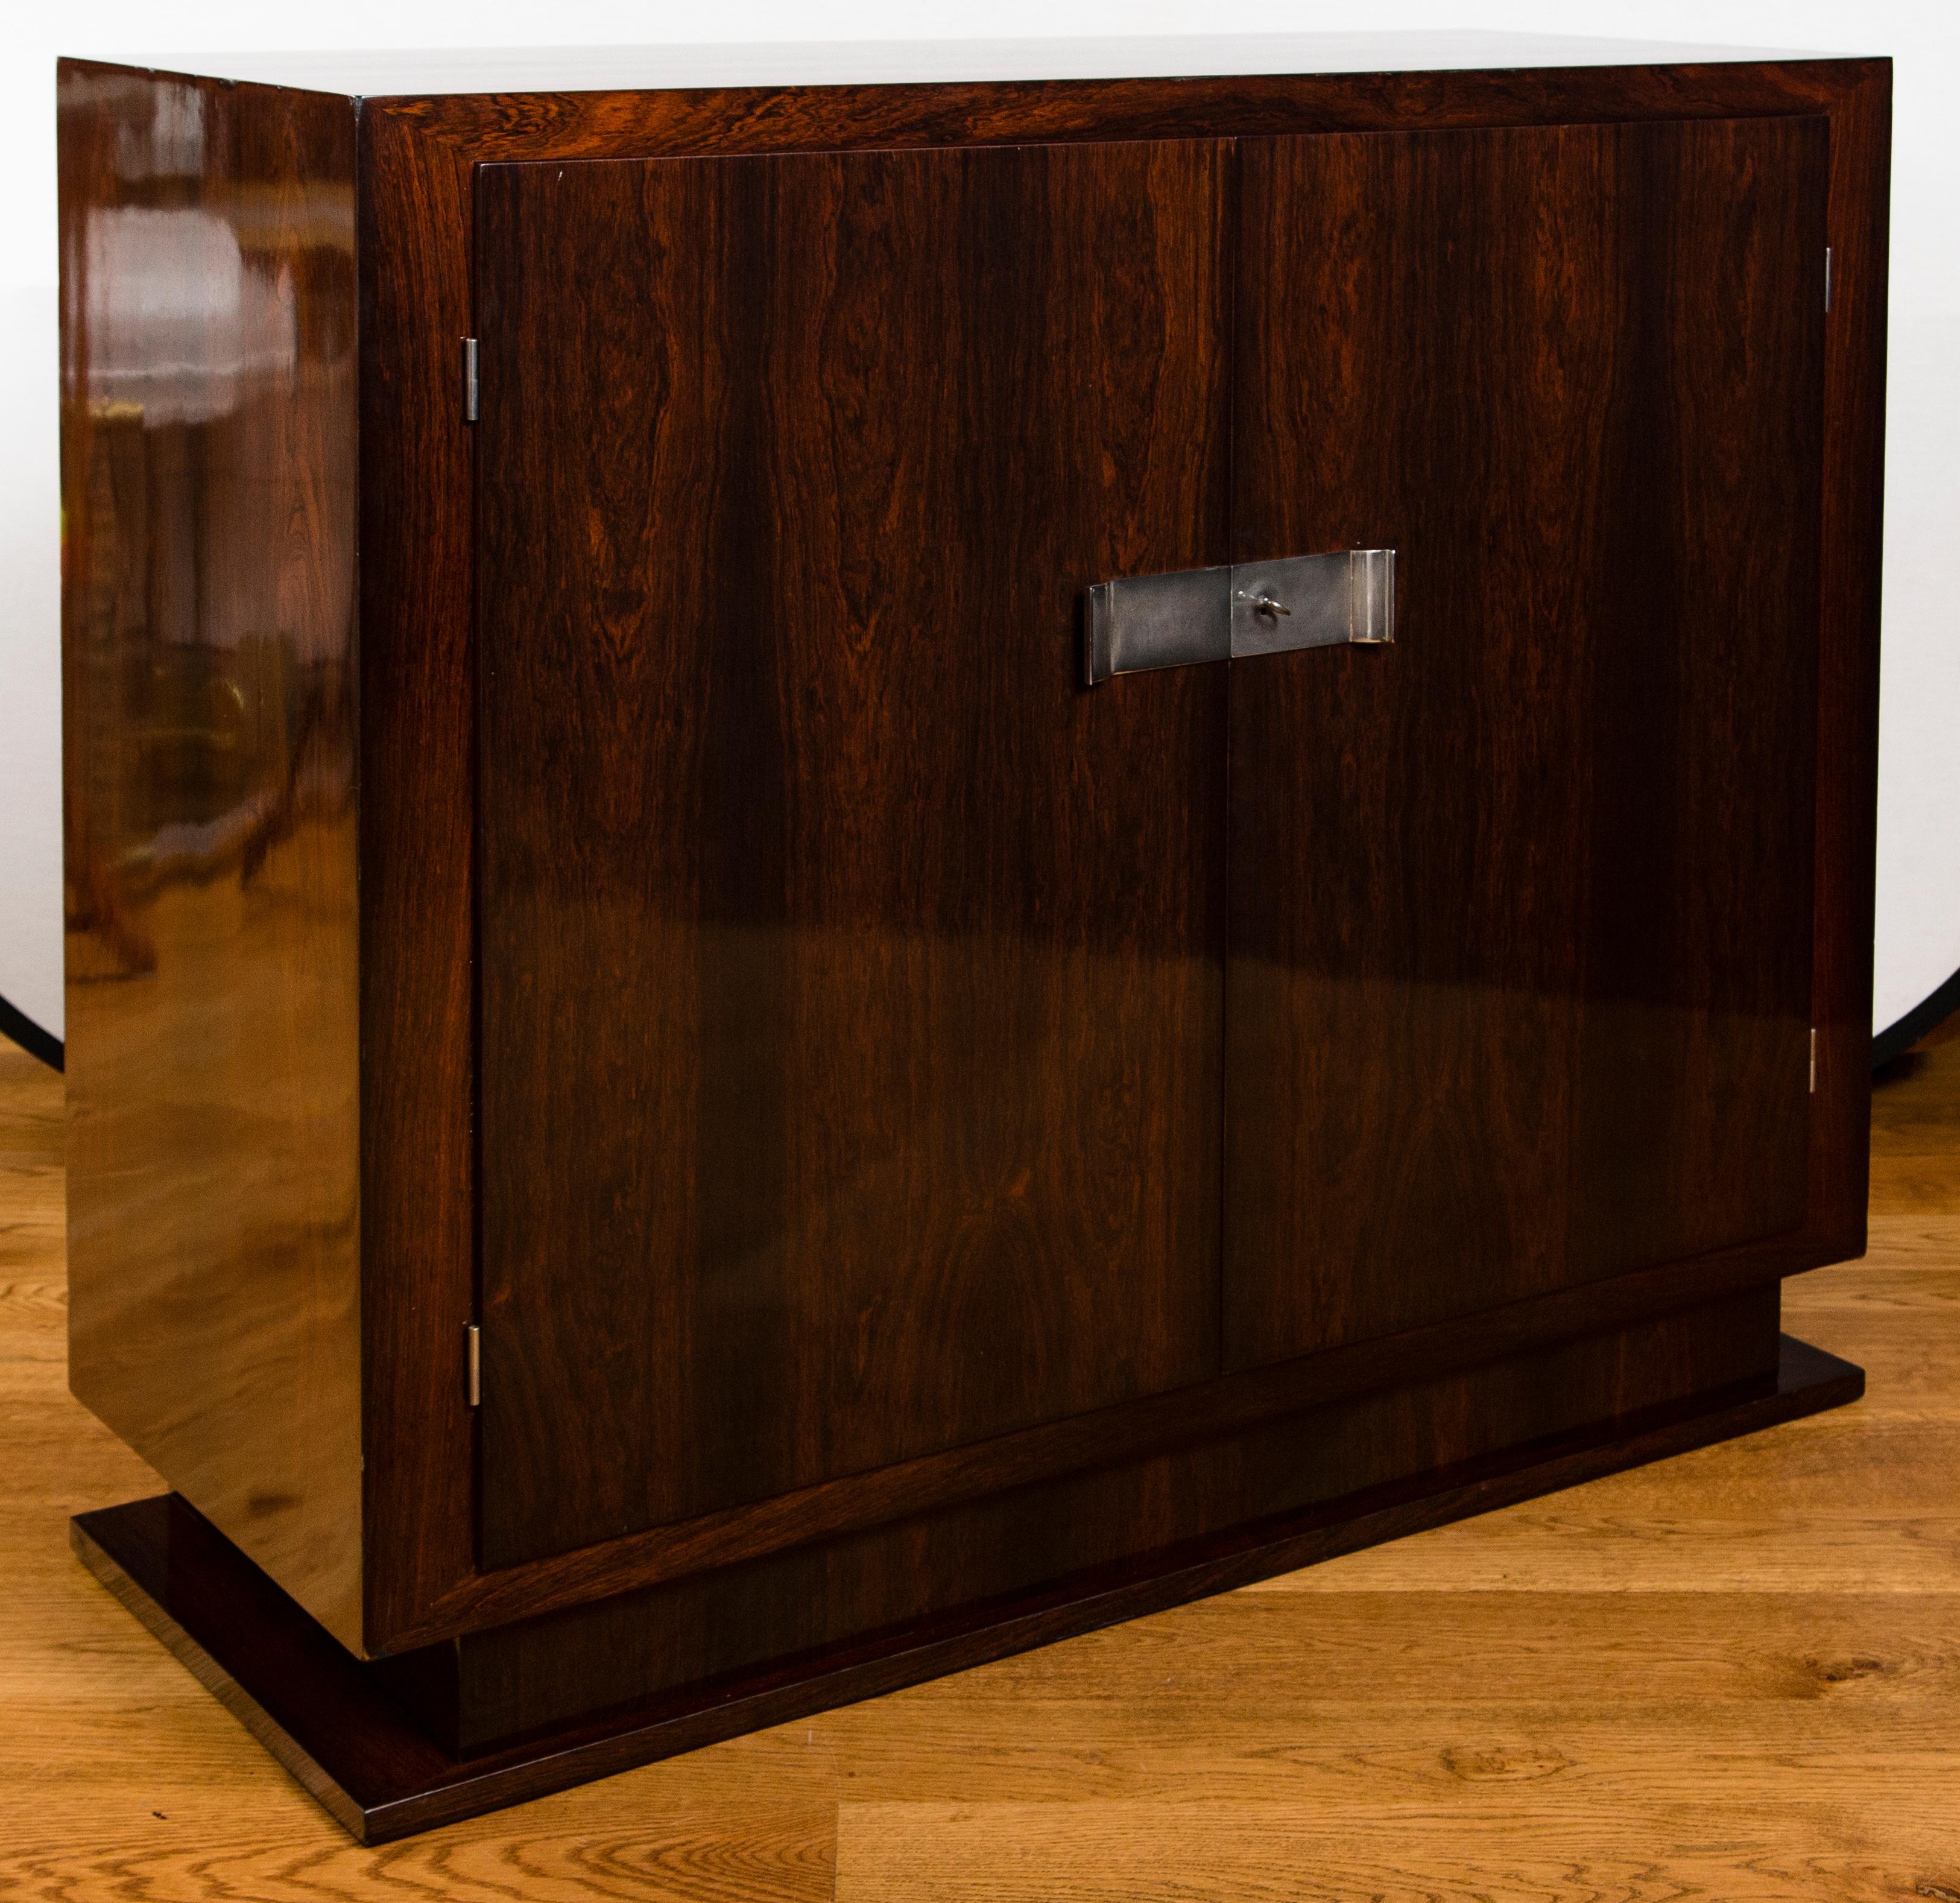 A super Art Deco two-door cabinet finishing on a pedestal base shown with nickel plated hardware in beautiful rich stained rosewood veneer.
Sleek two door cabinet/sideboard/bar on a pedestal base in a rich shellaced rosewood adorned with nickel